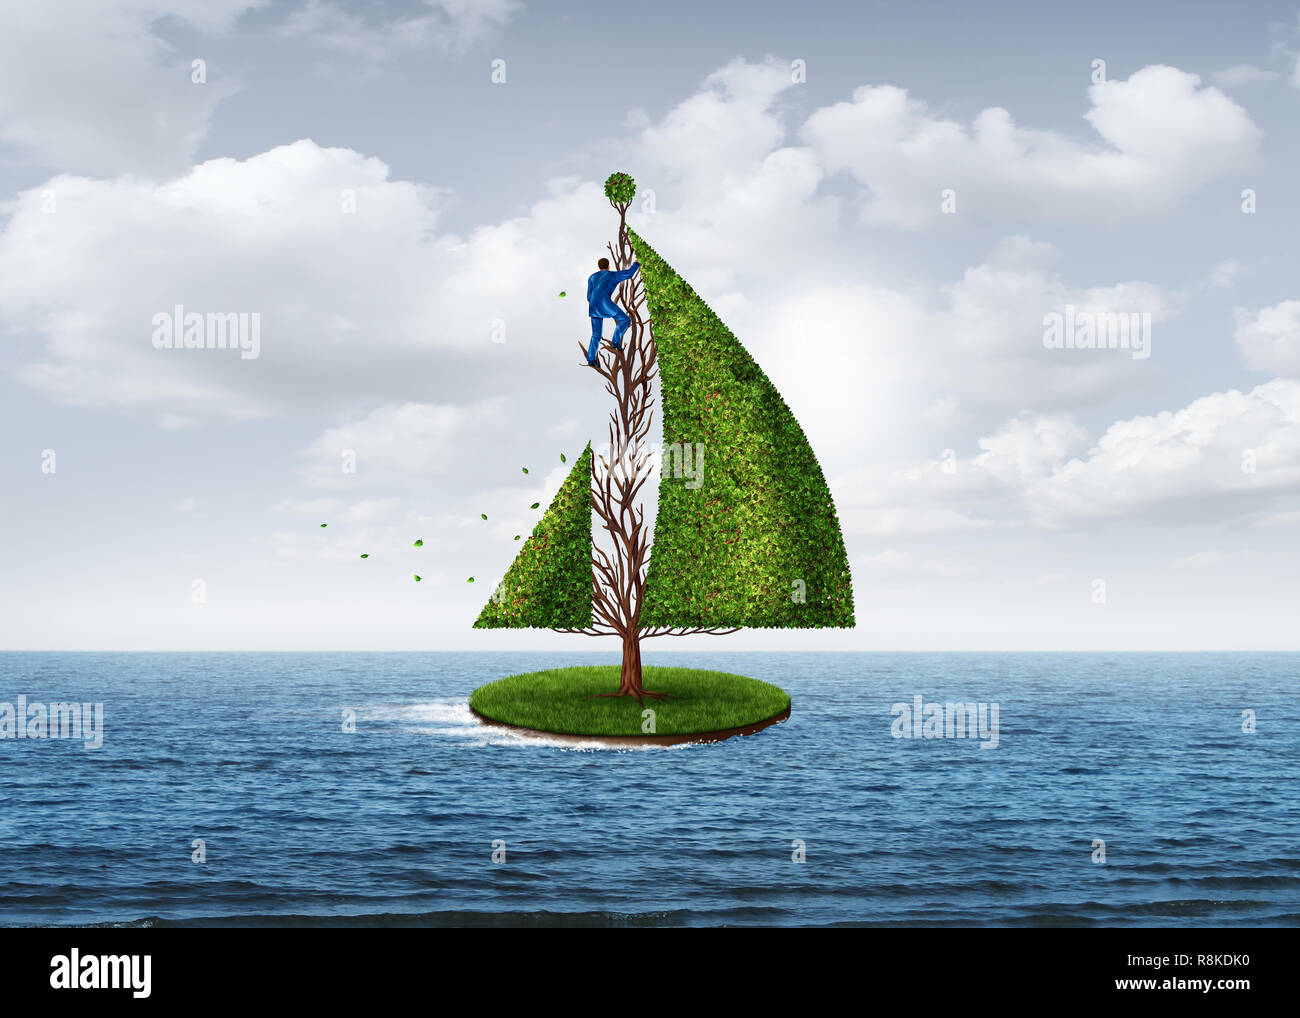 Business development metaphor and strategic forward creative thinking as a person shaping a tree into the shape of a moving sailboat. Stock Photo